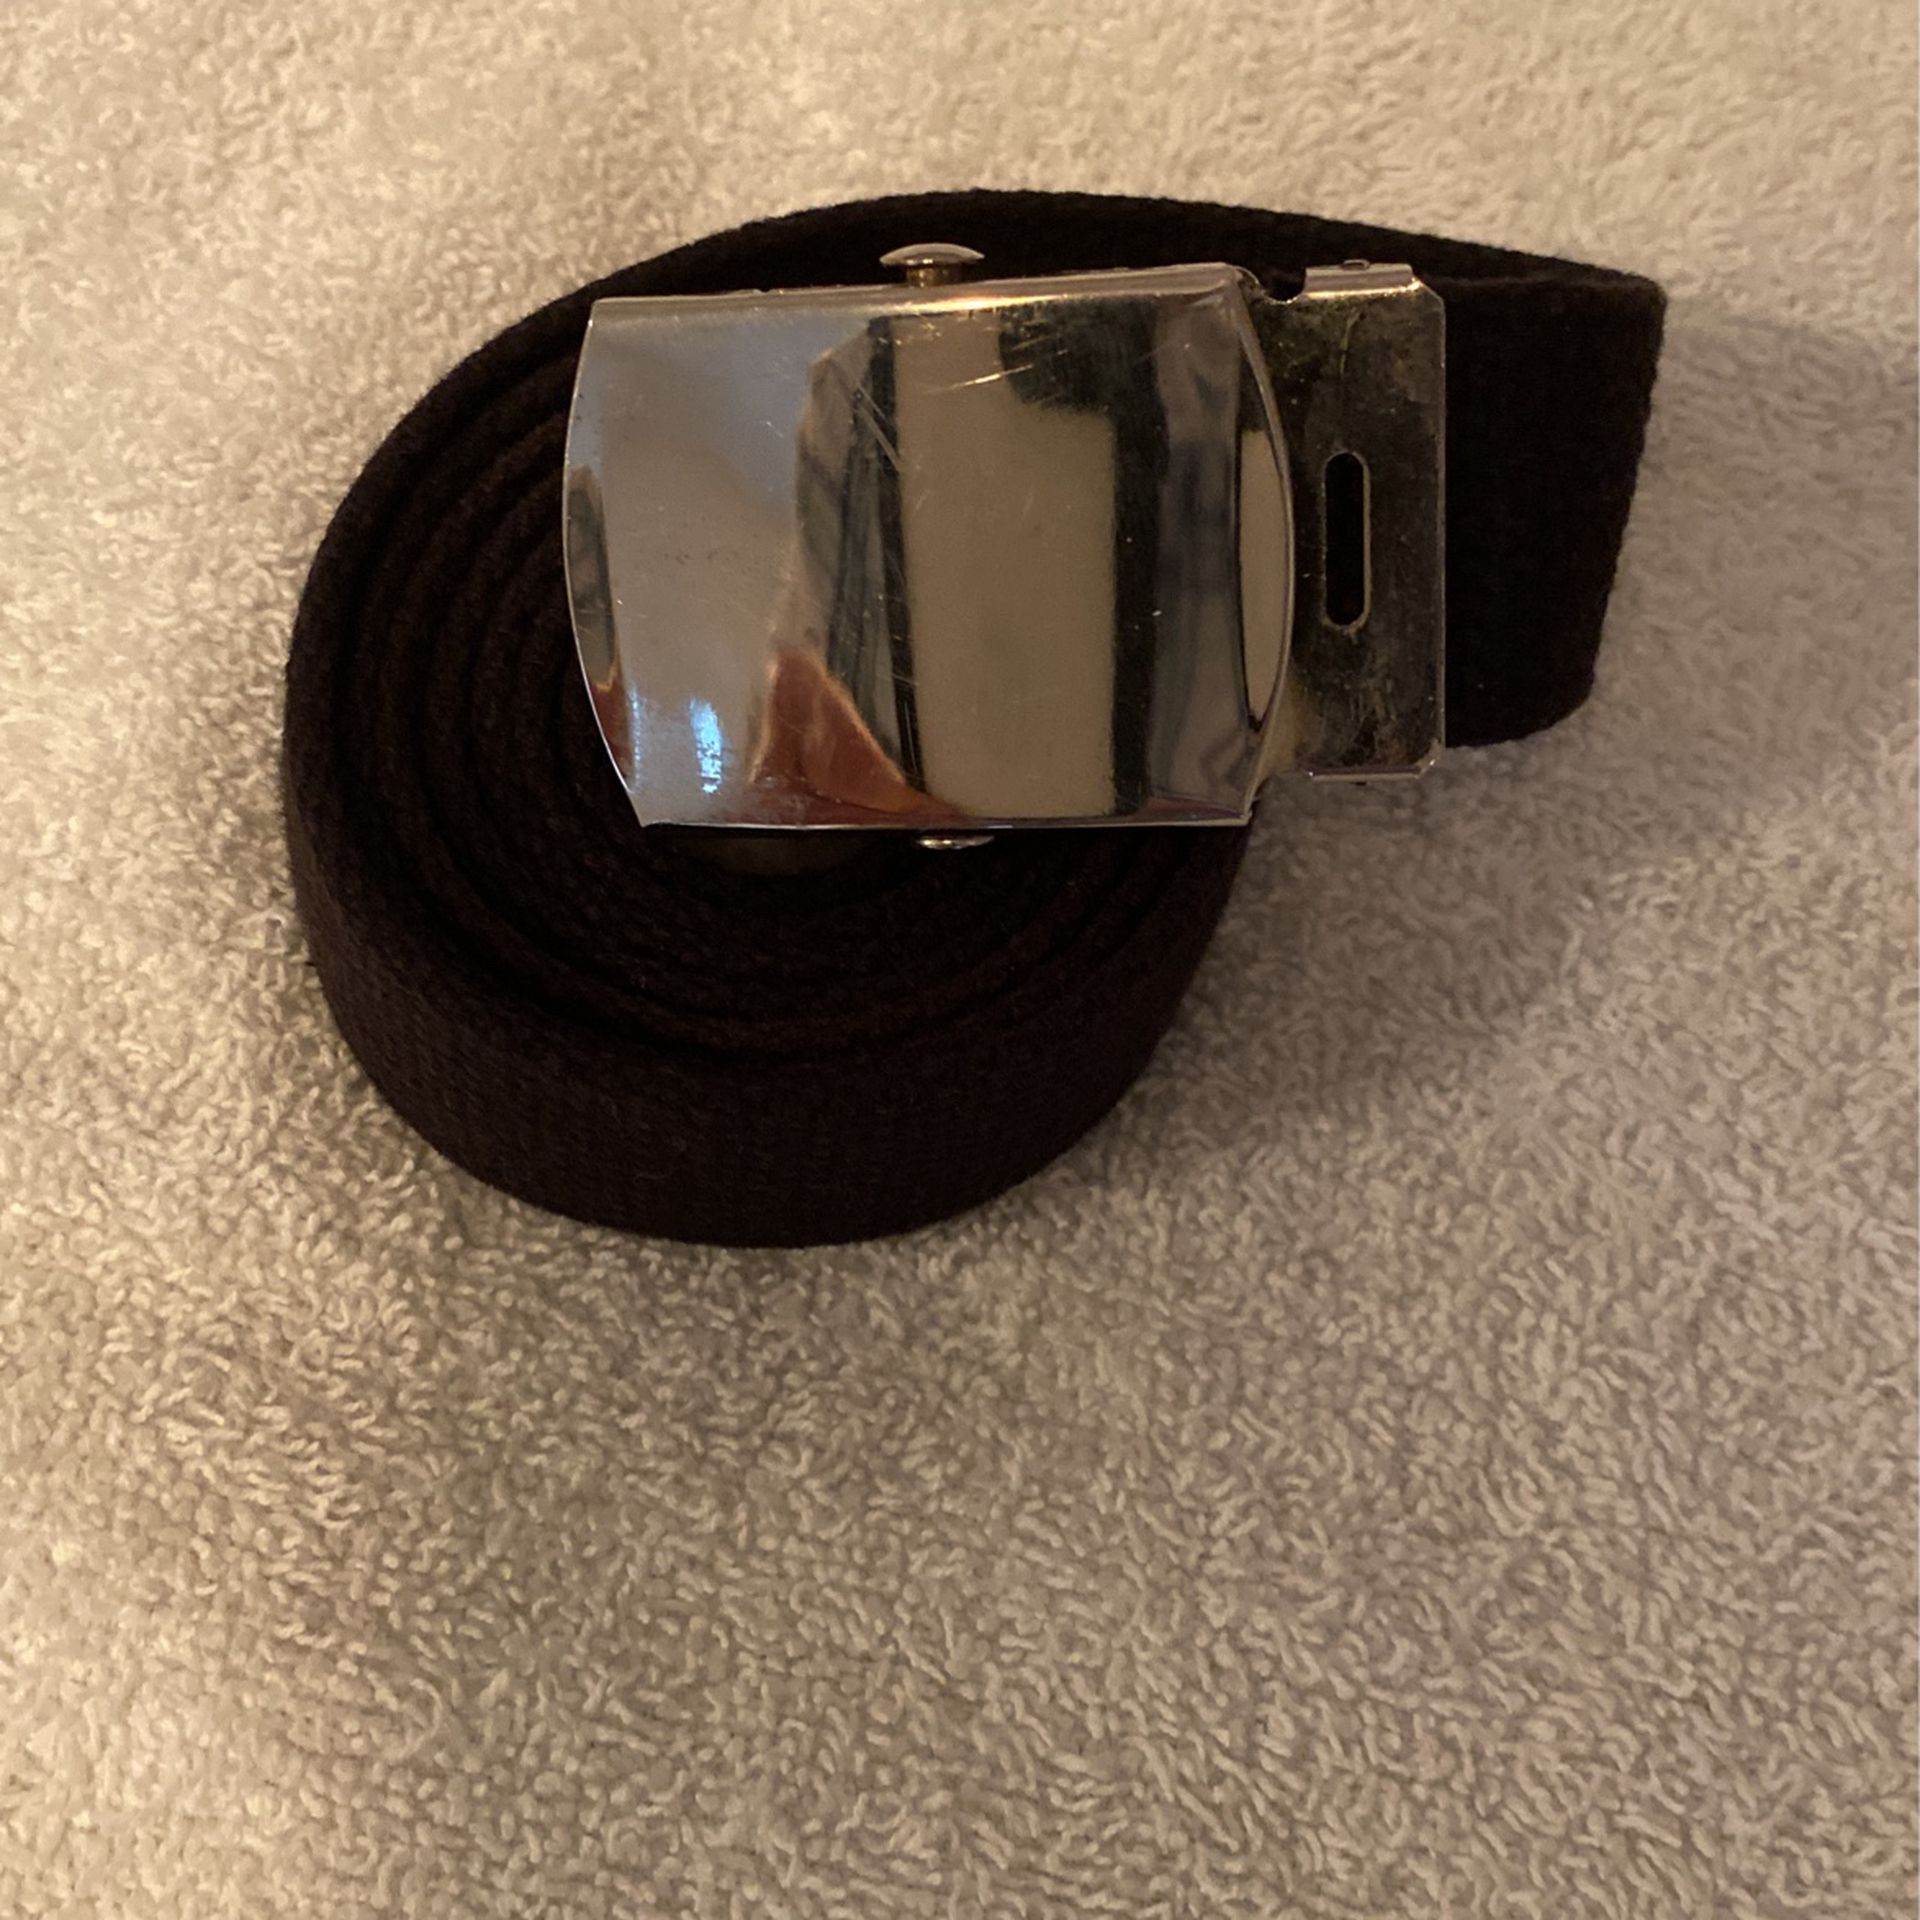 Military web belt with buckle 48 inchOr less